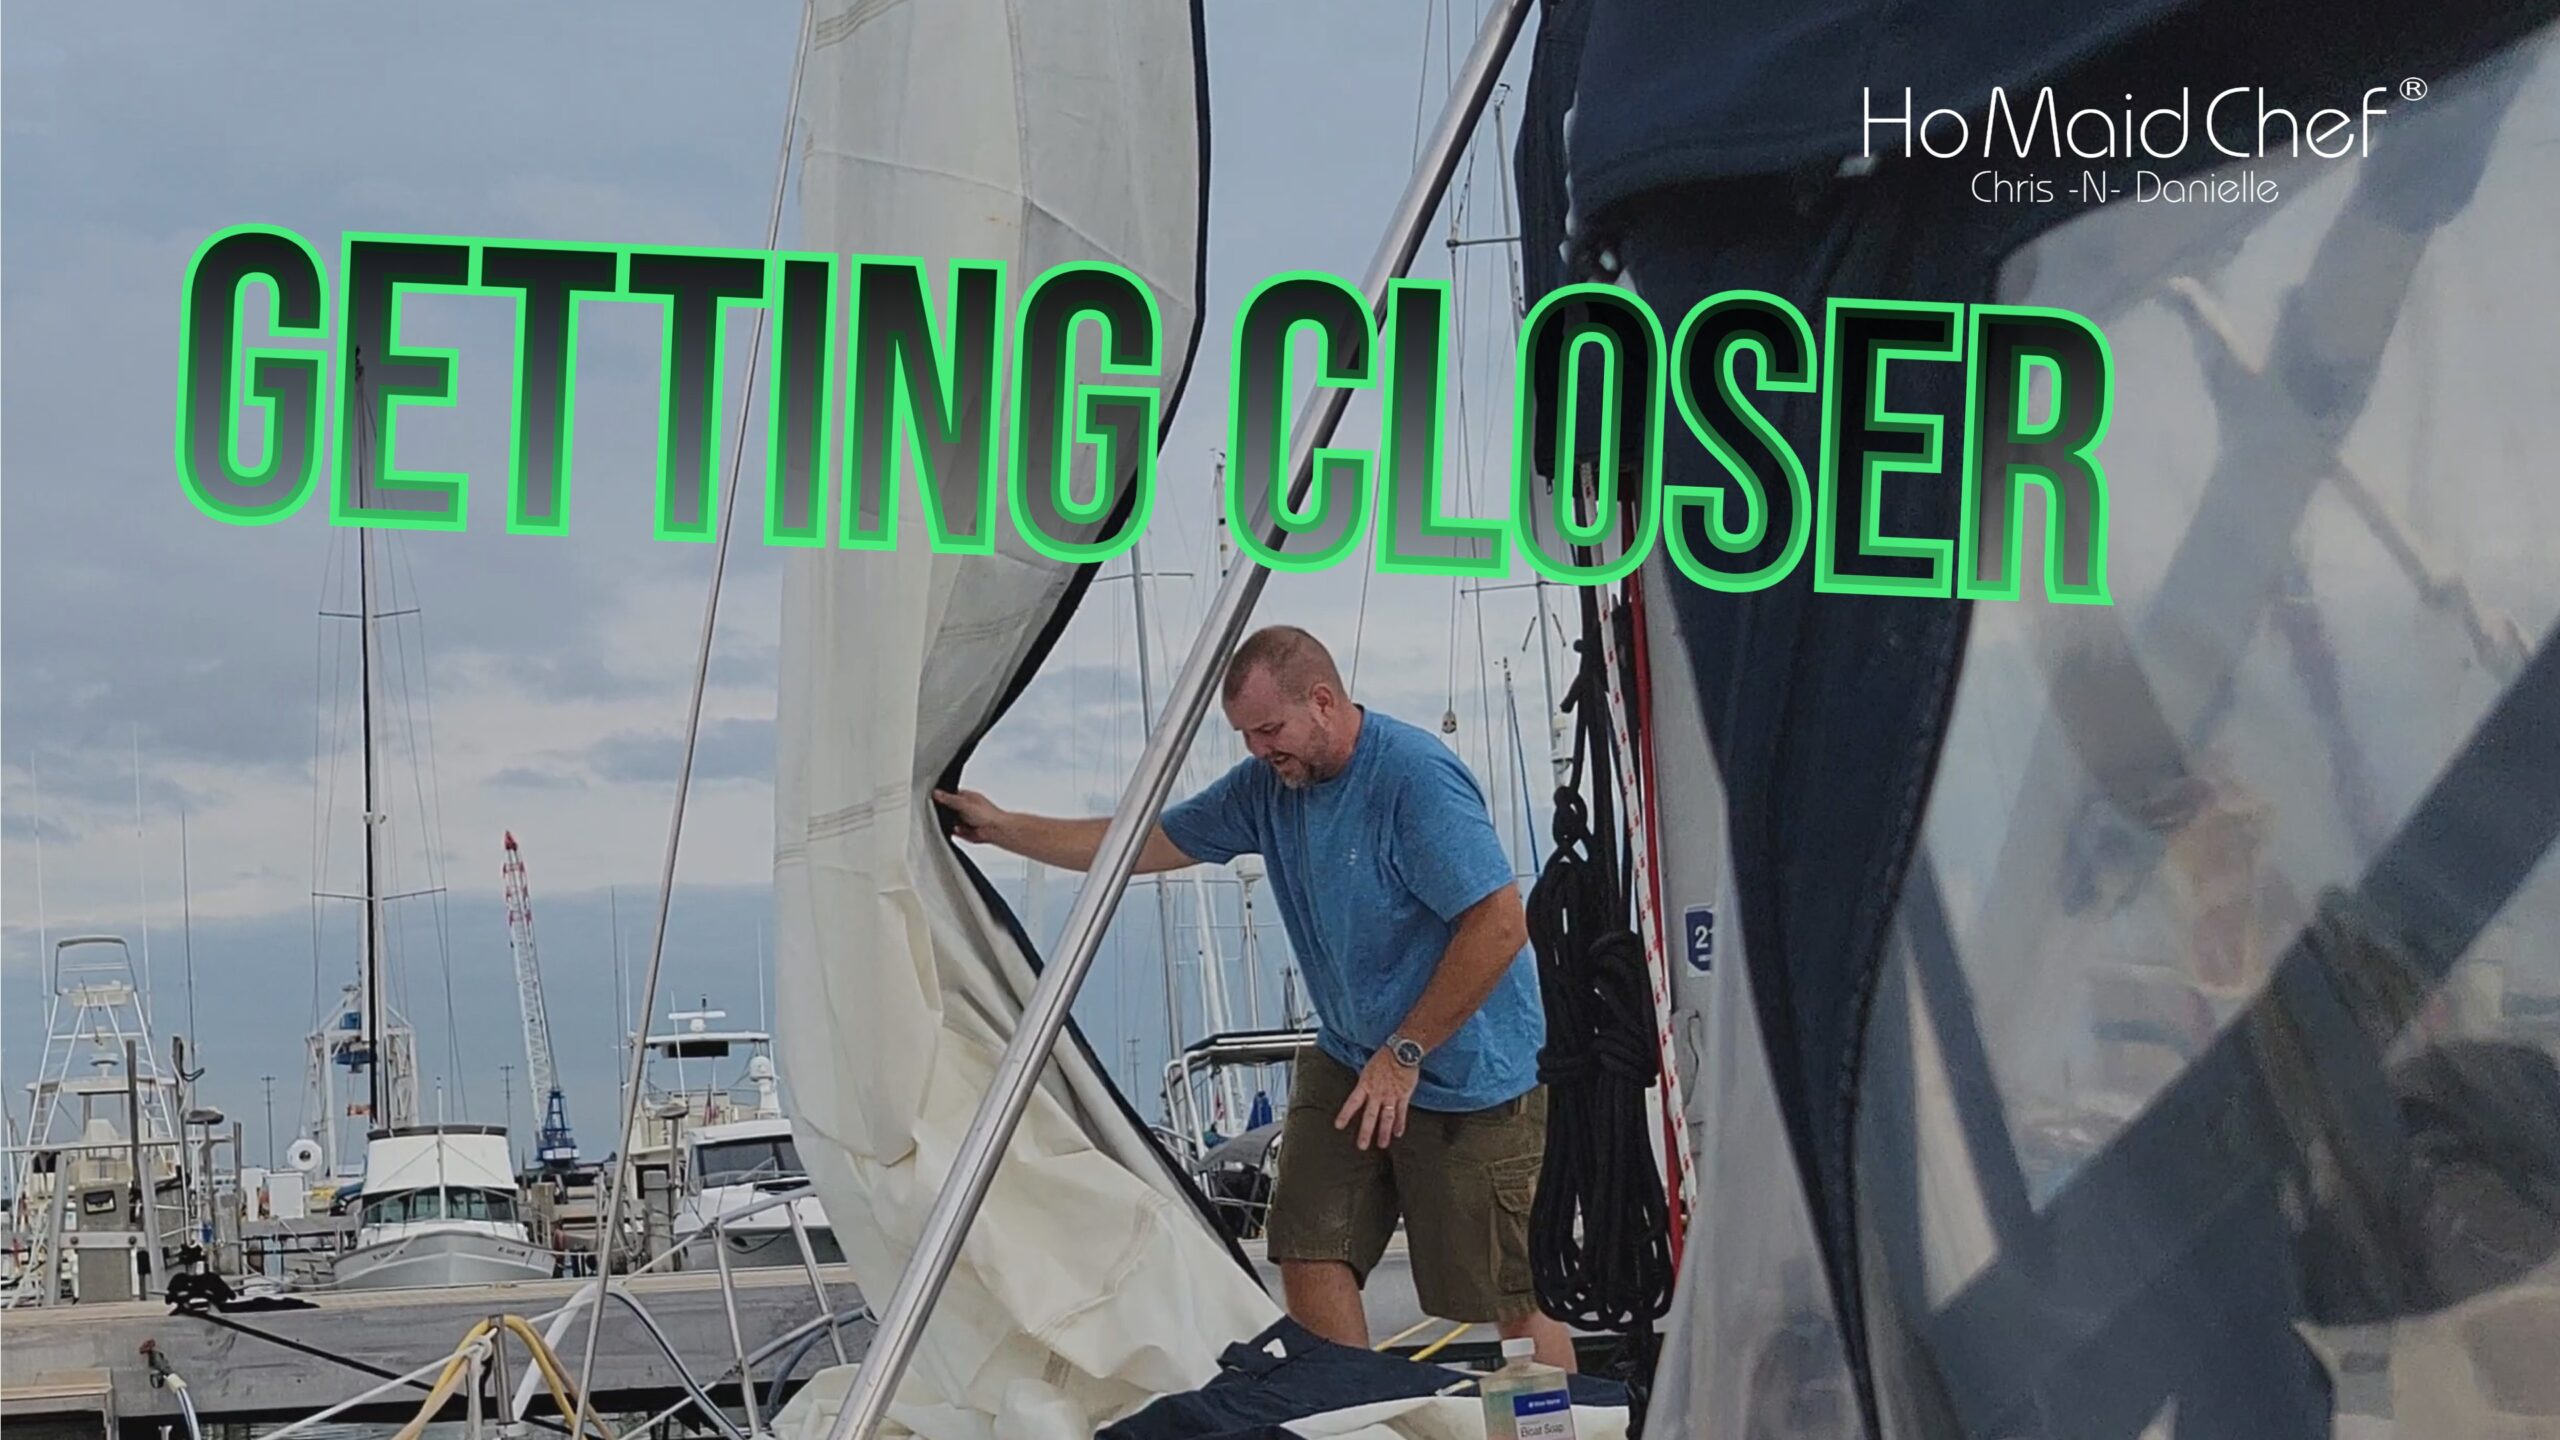 EP 4 - We're Working Hard To Get This Sailboat On The Hook So We Can Start Our Journey!